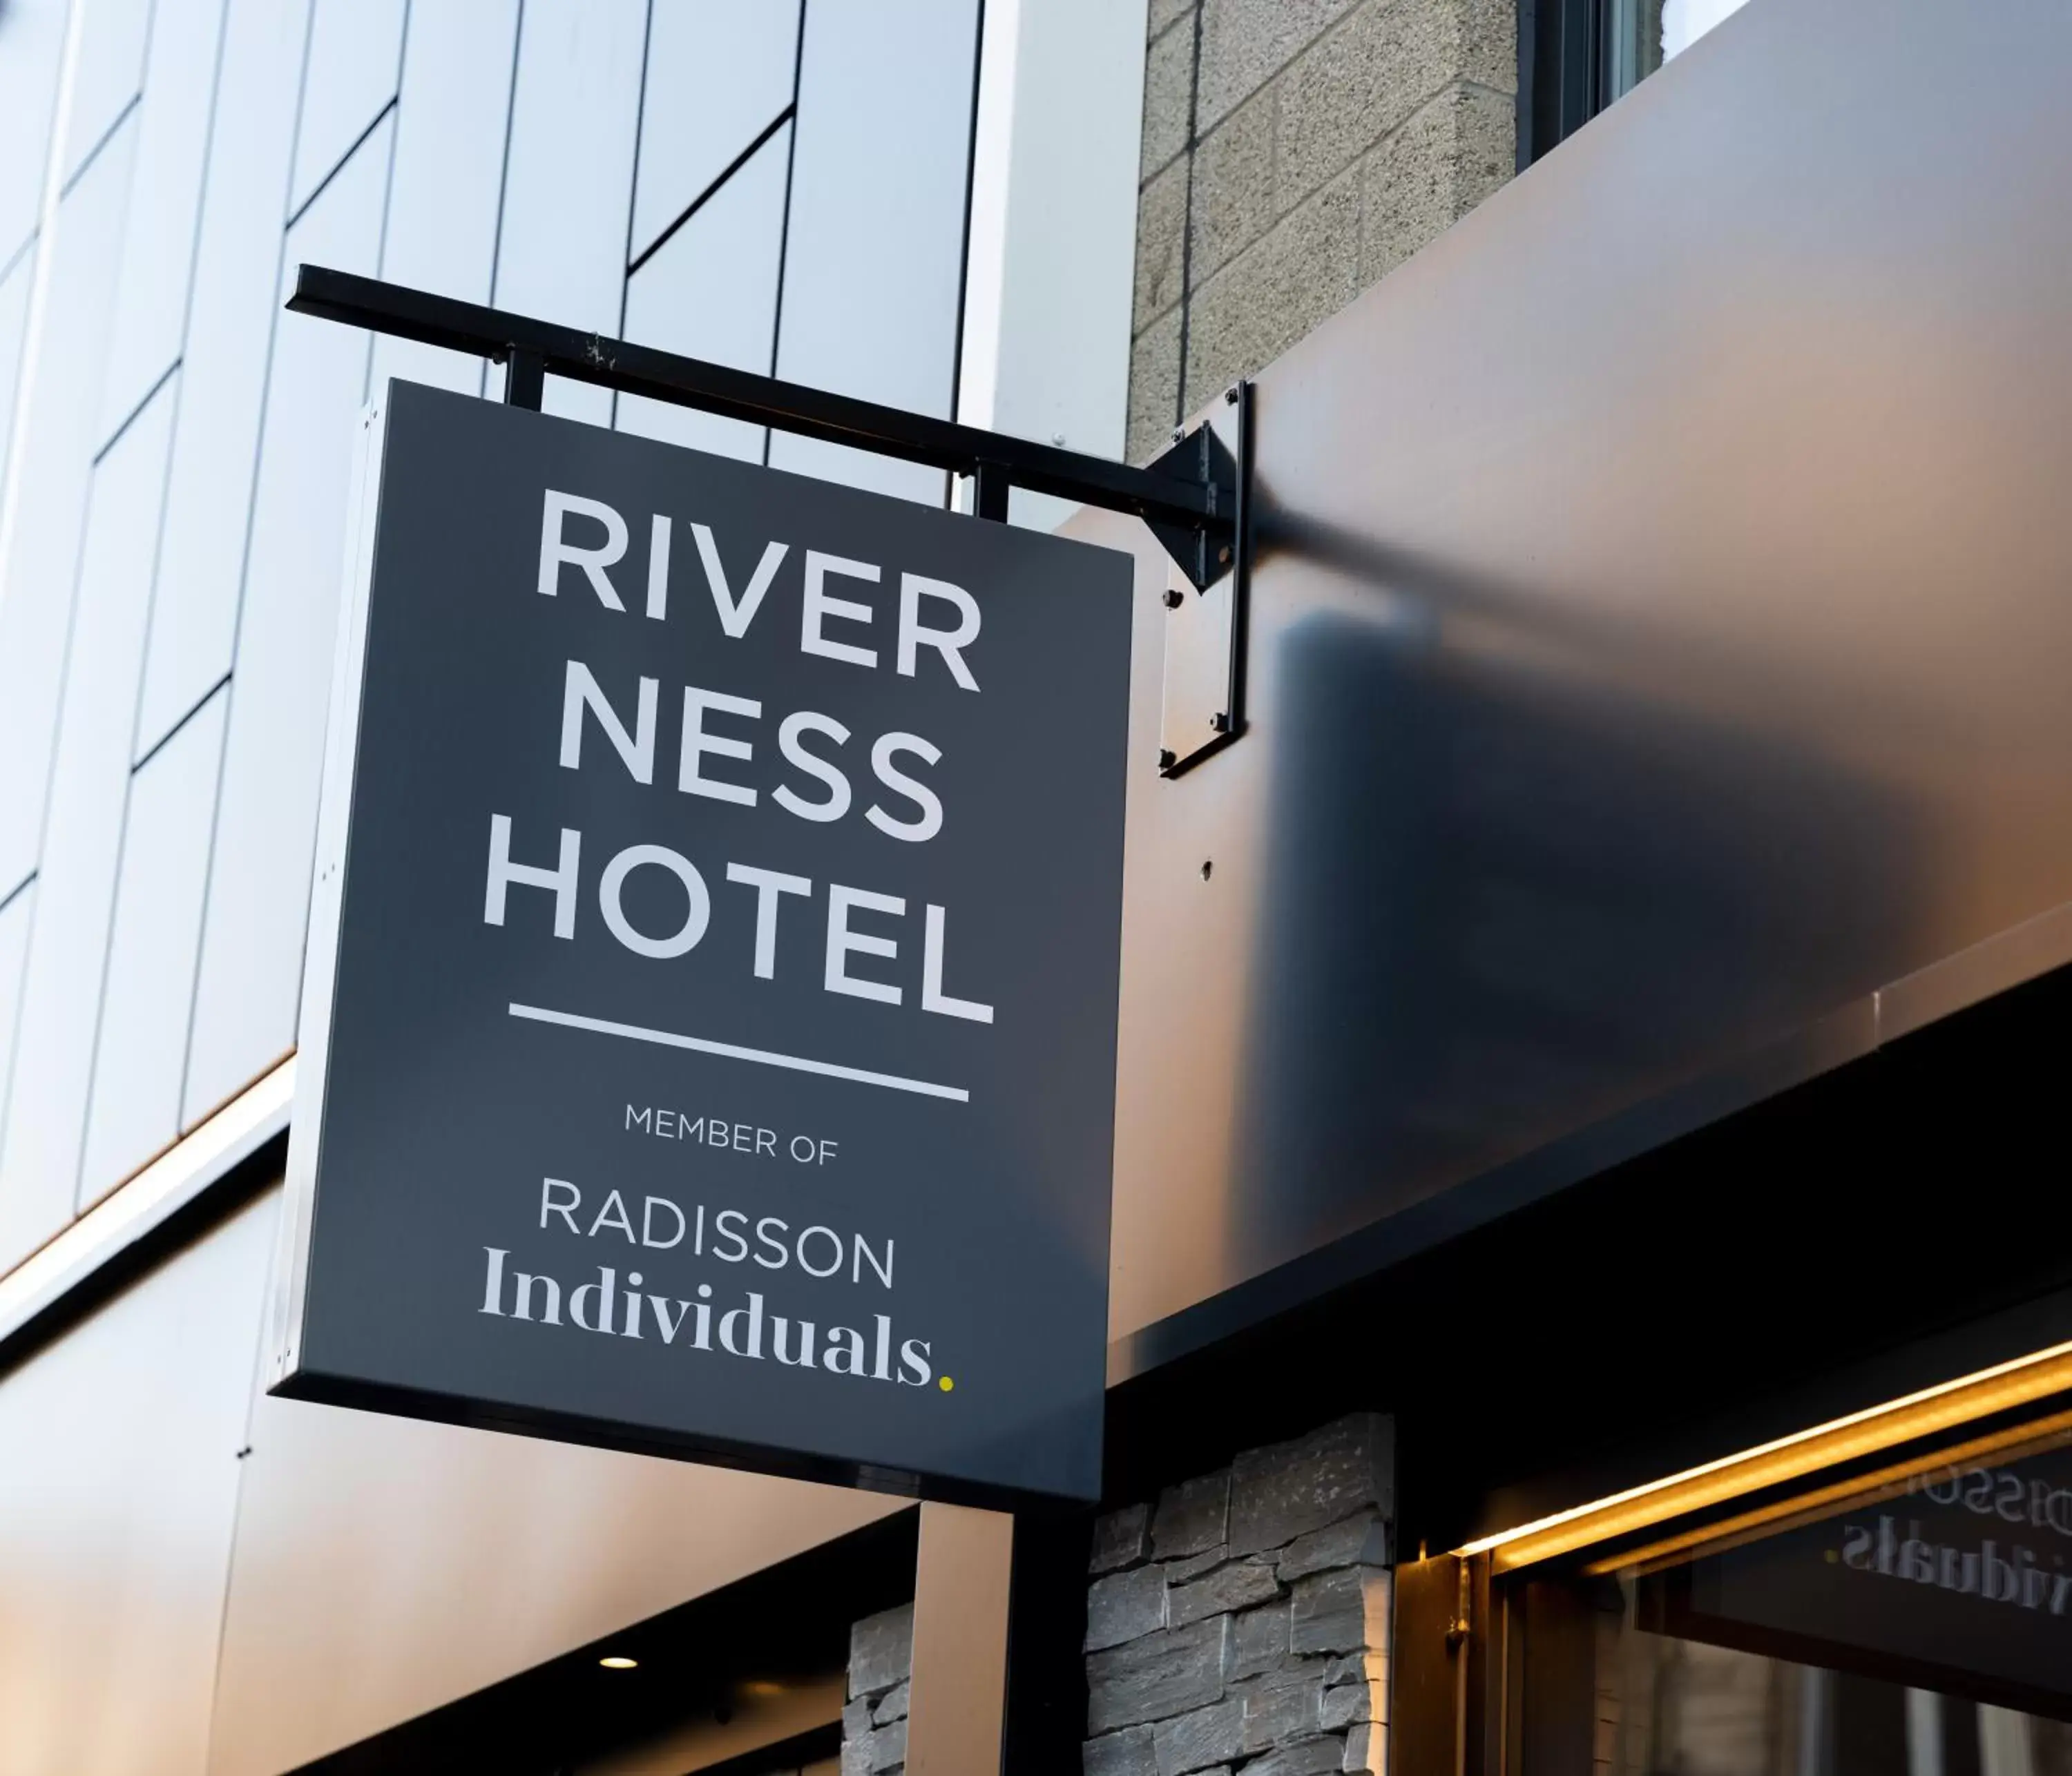 Property building in River Ness Hotel, a member of Radisson Individuals